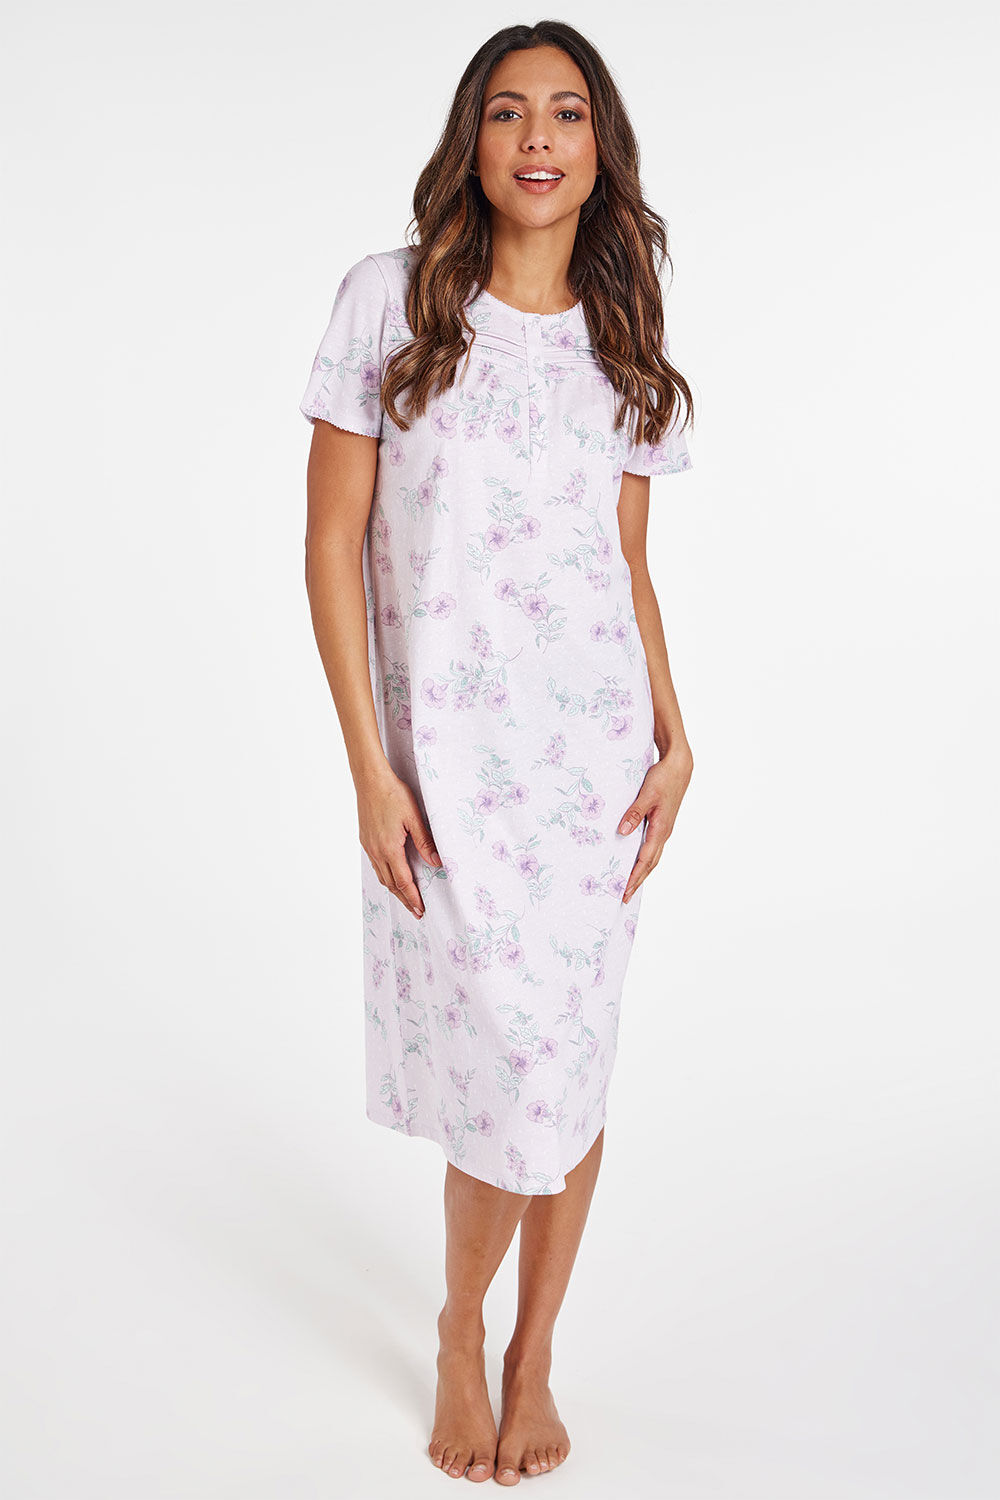 Bonmarche Lilac Short Sleeve Floral and Spot Print Nightdress, Size: 08-10